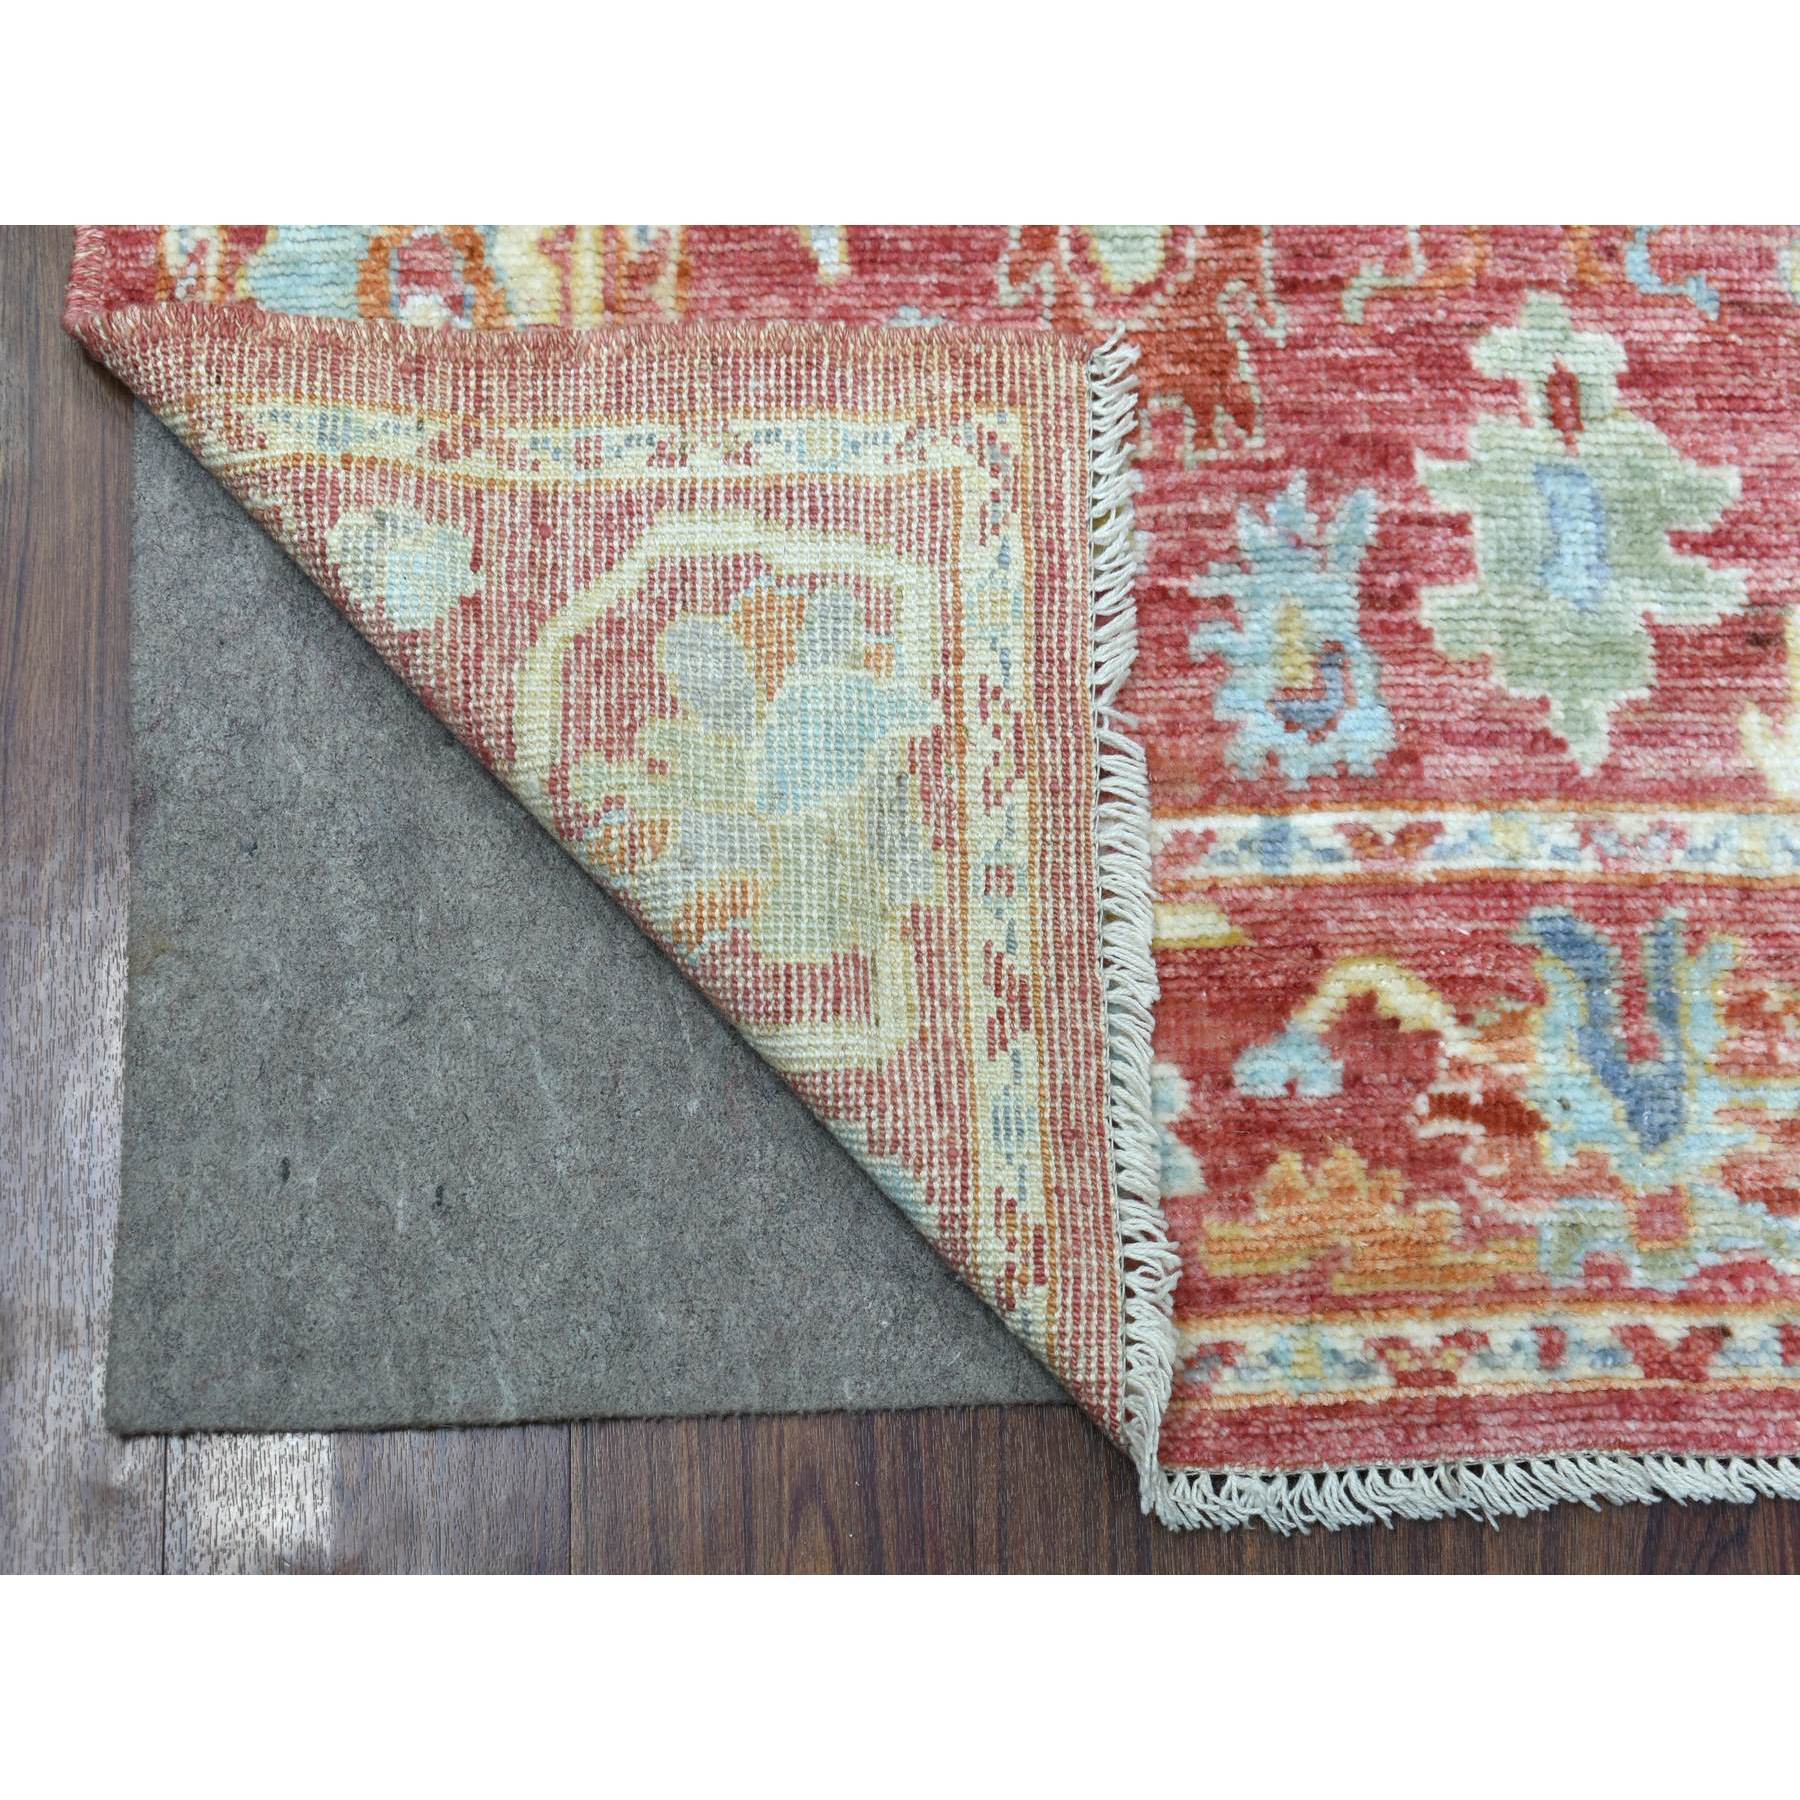 3'10"x5'8" Afghan Angora Oushak with Bold Floral Pattern Extremely Durable Hand Woven Coral Pink Oriental Rug 